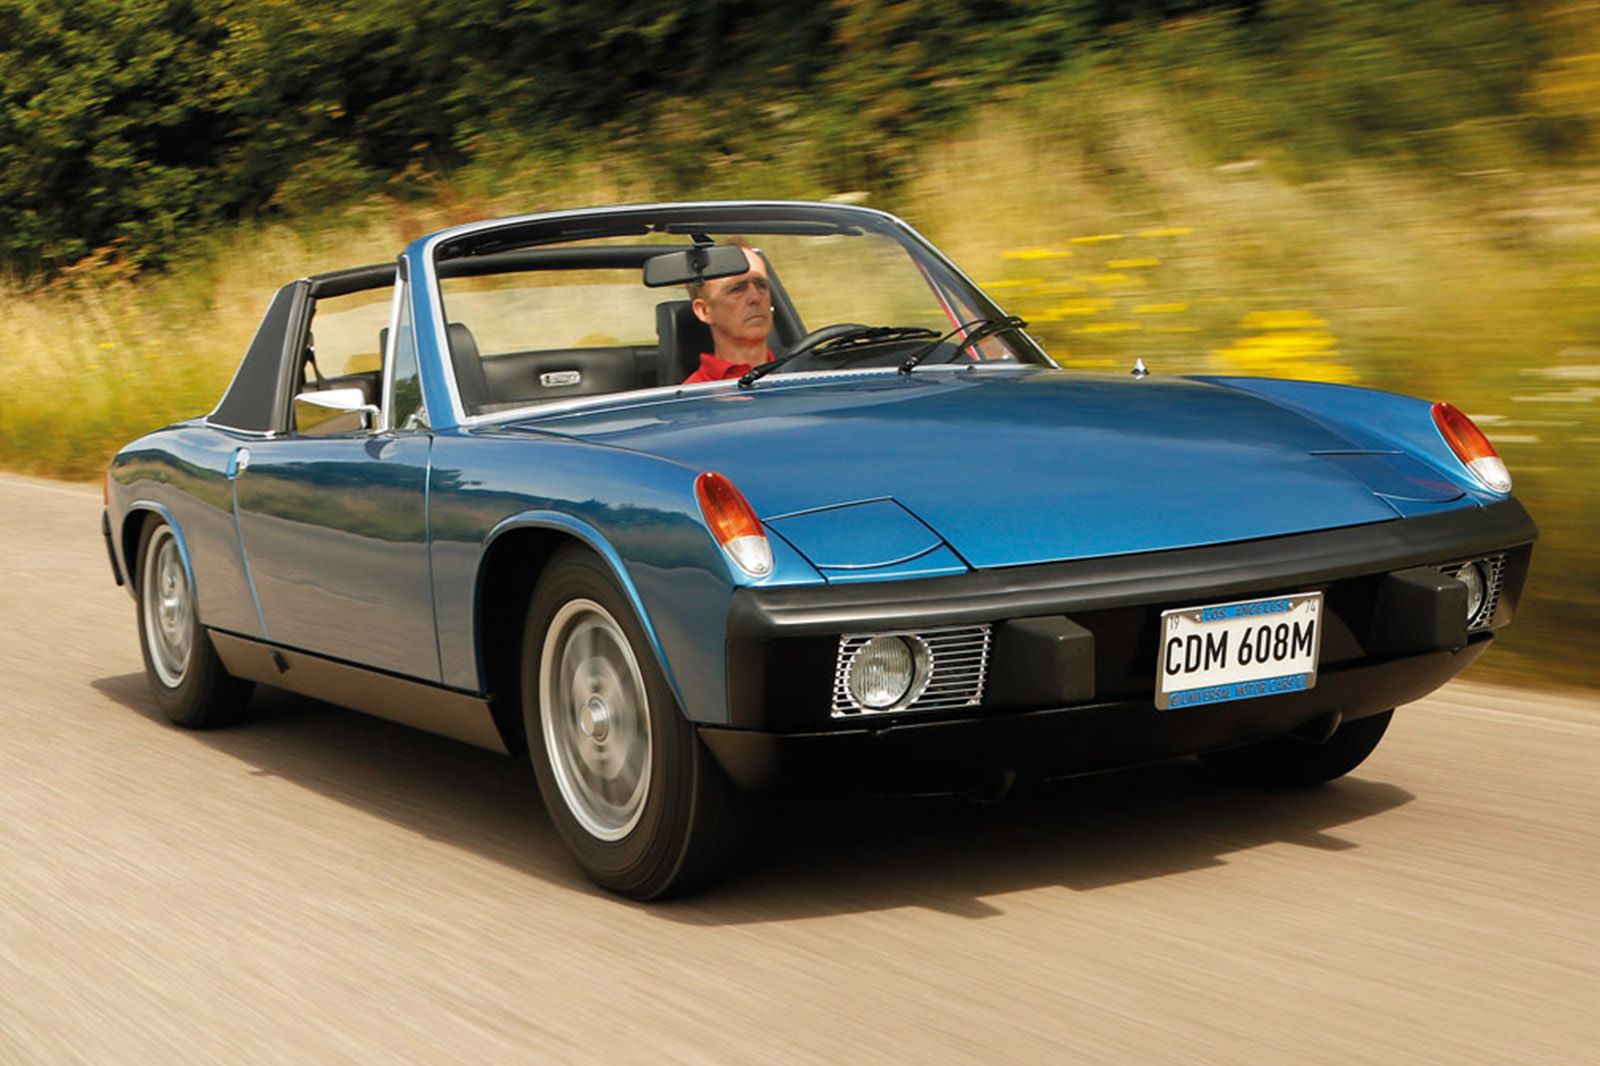 Porsche 914 driving on the road